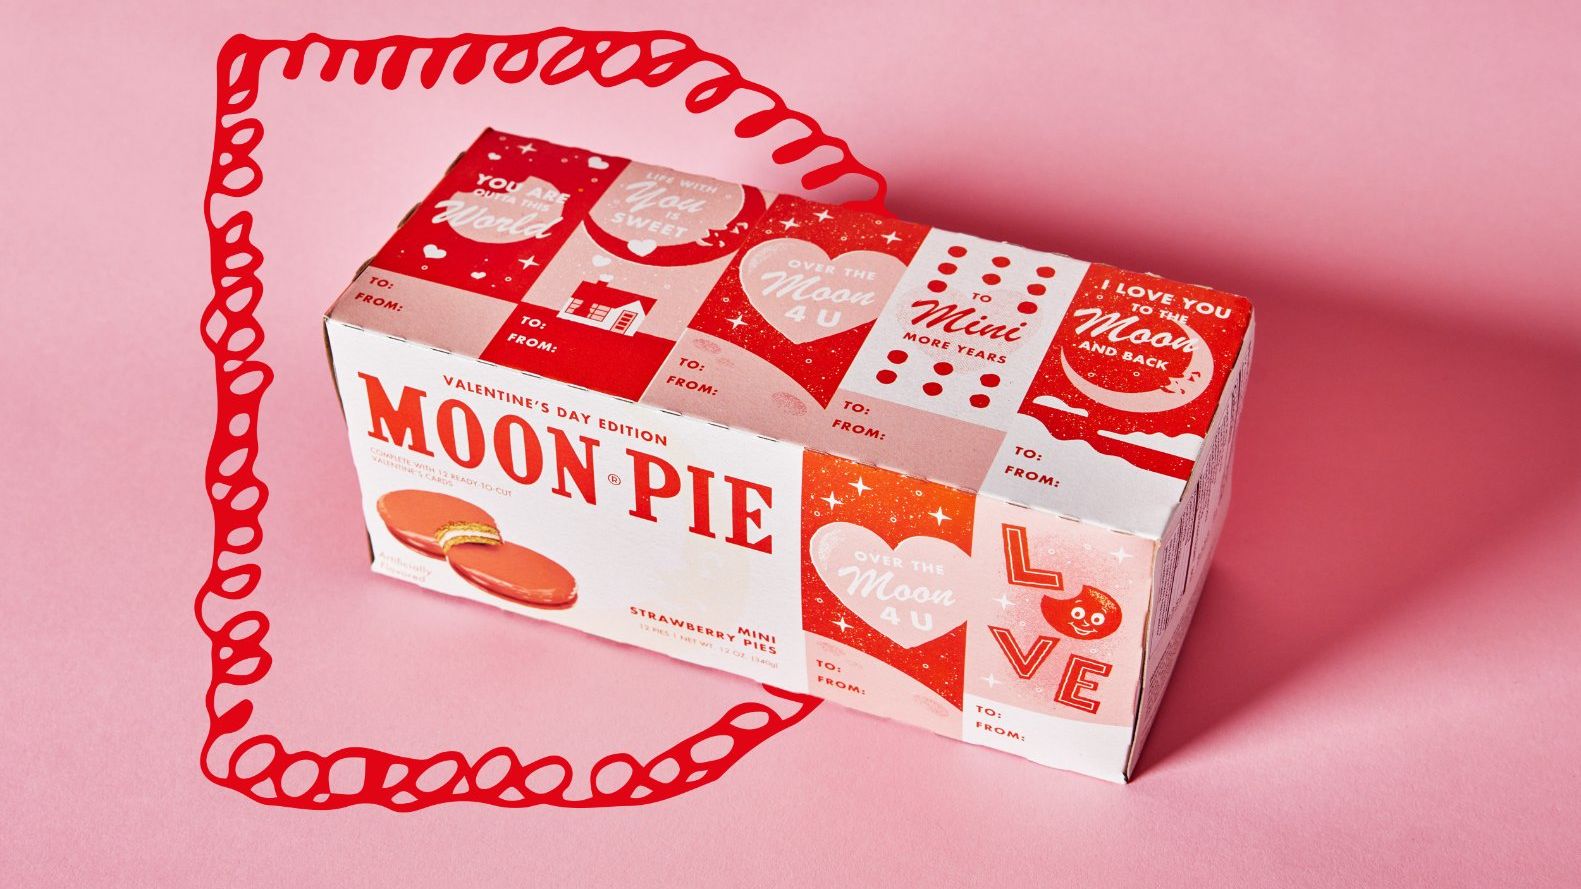 Pack of the Month: MoonPie Turns Their Packaging Into Valentine’s Day Cards